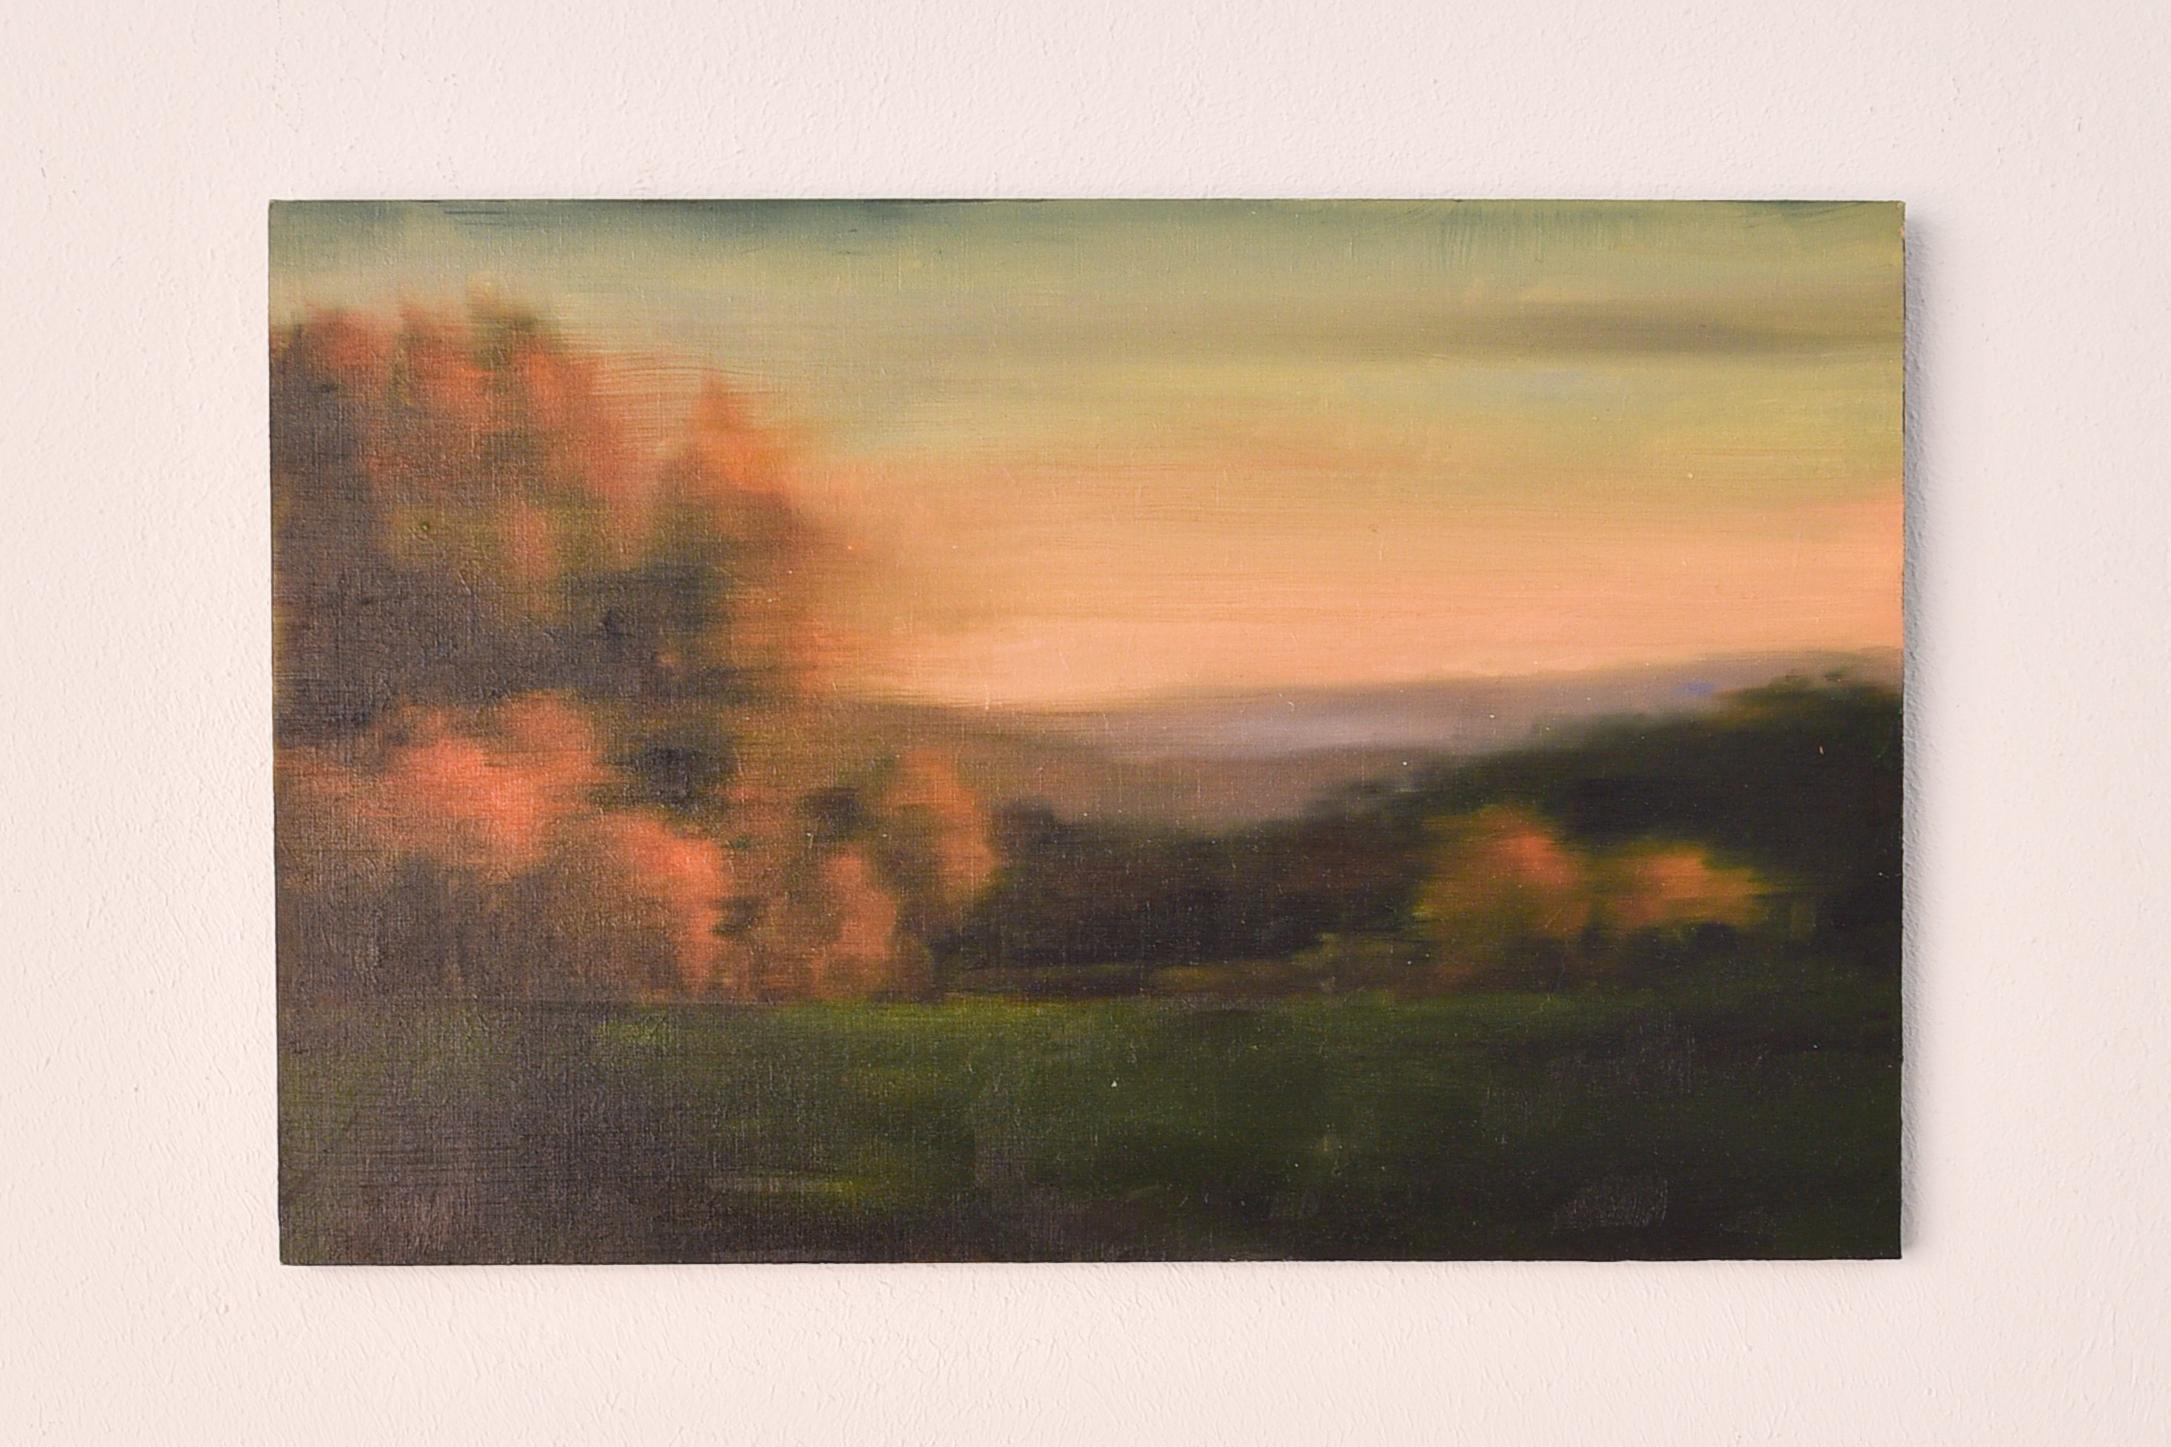 Neide Carreira (Lisbon, Portugal 1992- ): this painting - oil on wood panel - is called Autumn Evening #4, and indeed shows a beautiful landscape in autumn with the typical autumn colors (brown, red, yellow). 

The painting is signed on the back and